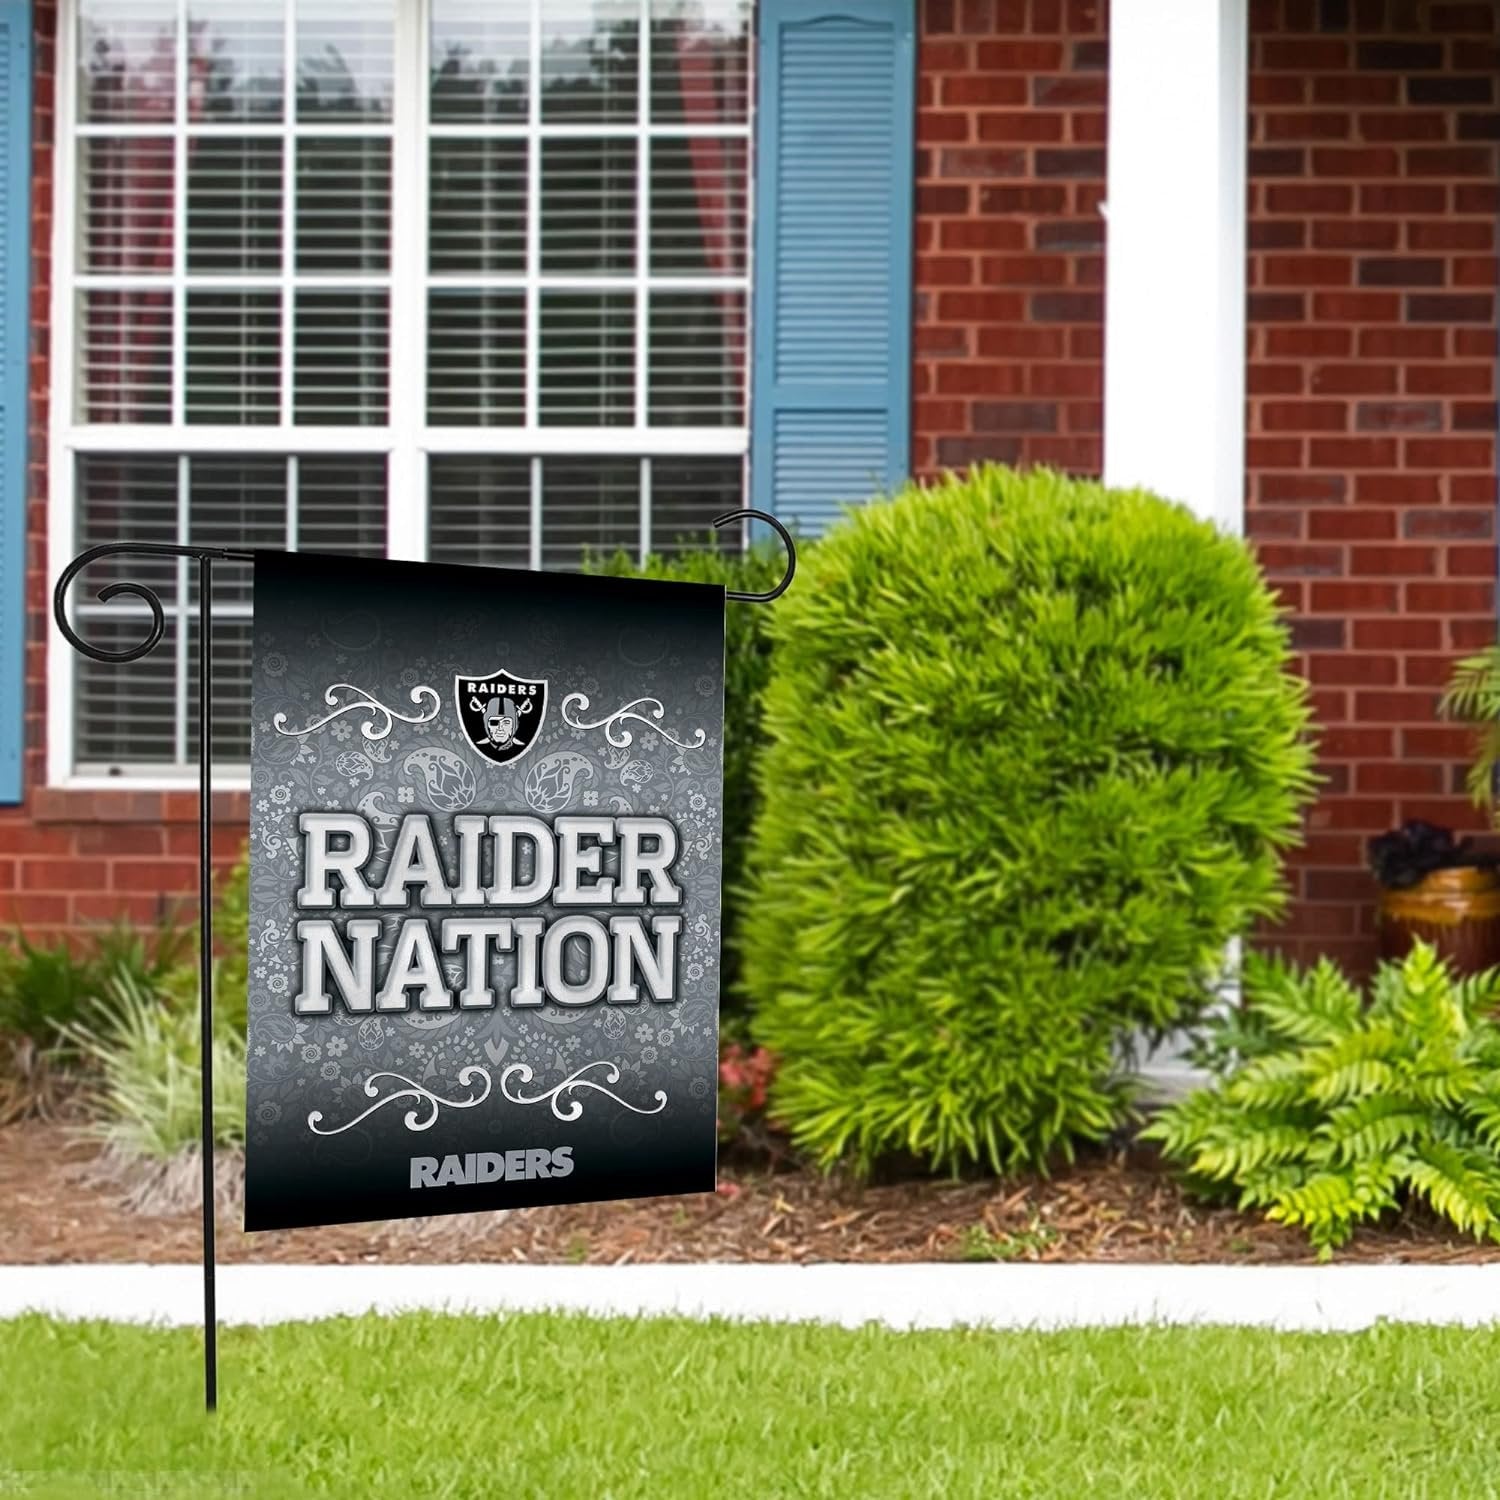 Las Vegas Raiders Premium Double Sided Garden Flag Banner, Raider Nation, 13x18 Inch, Display Pole Sold Separately